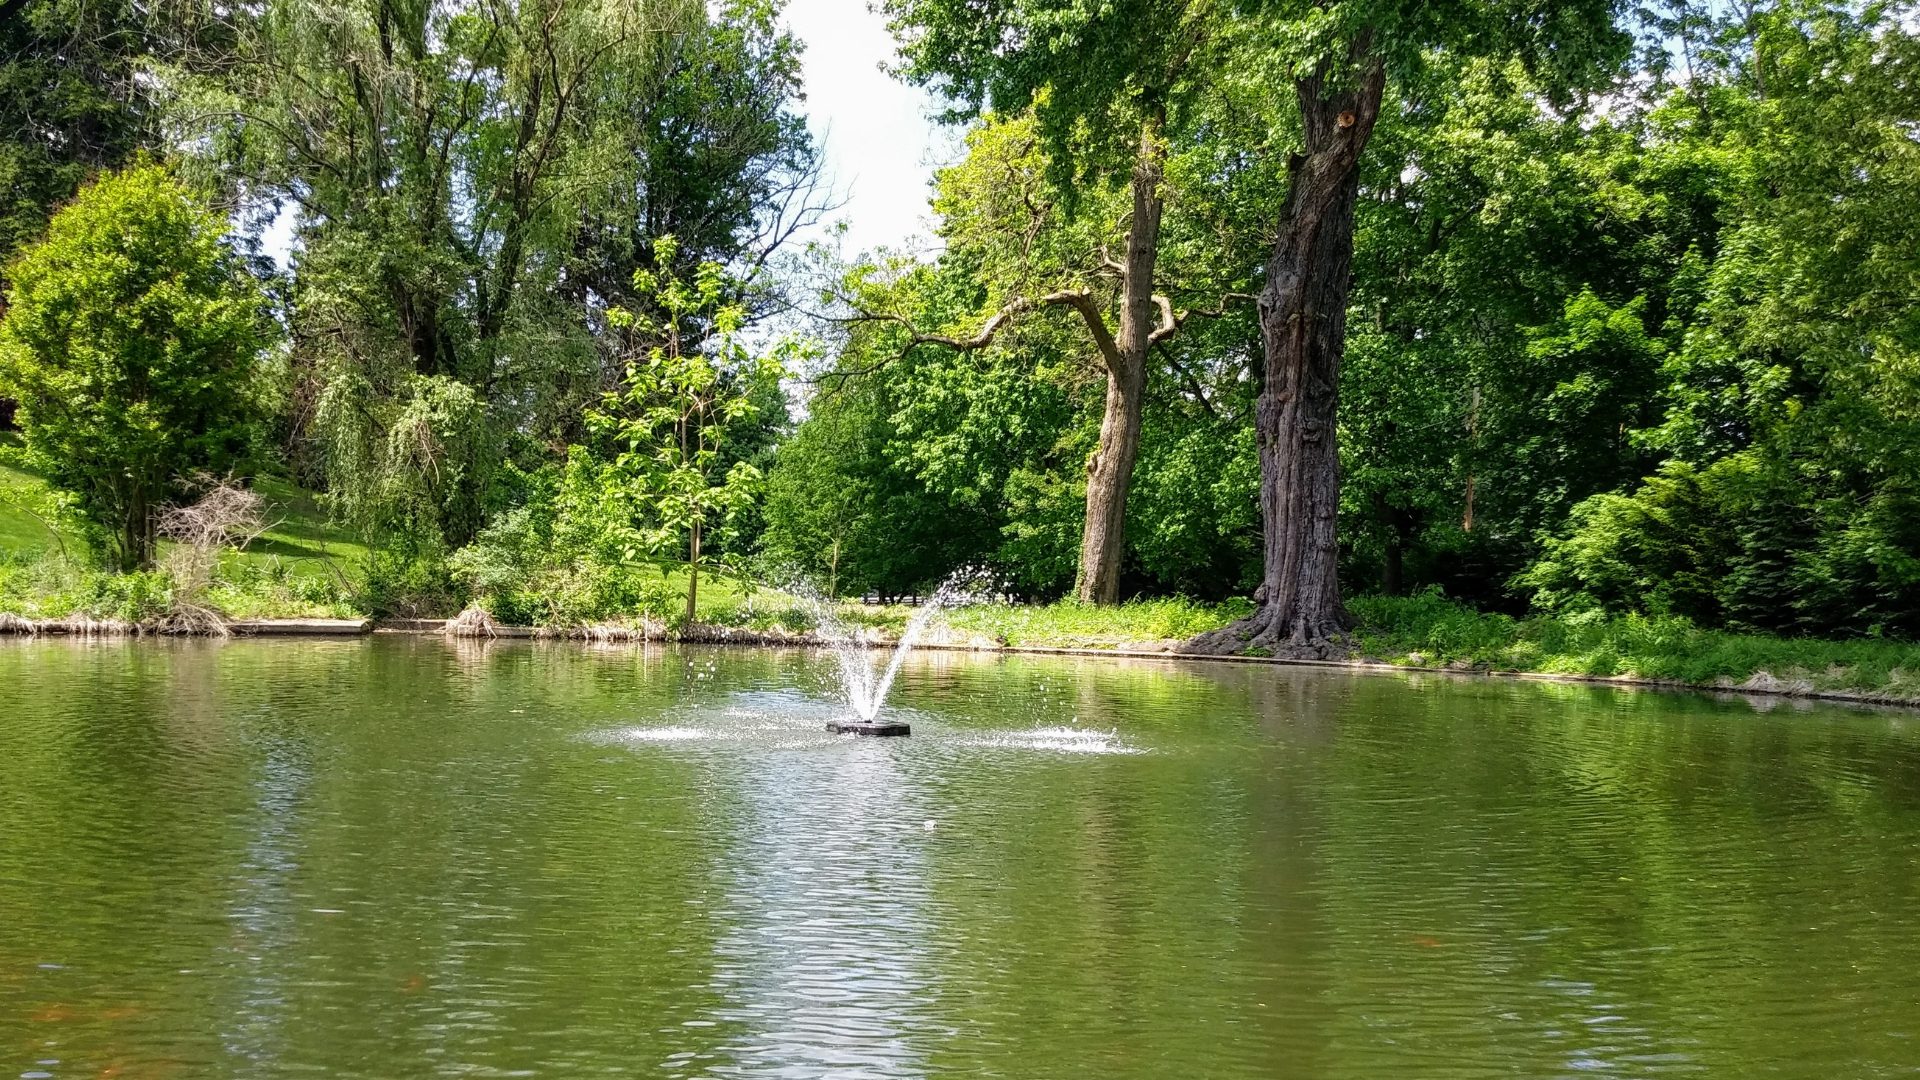 A fountain in the middle of a lake near trees.